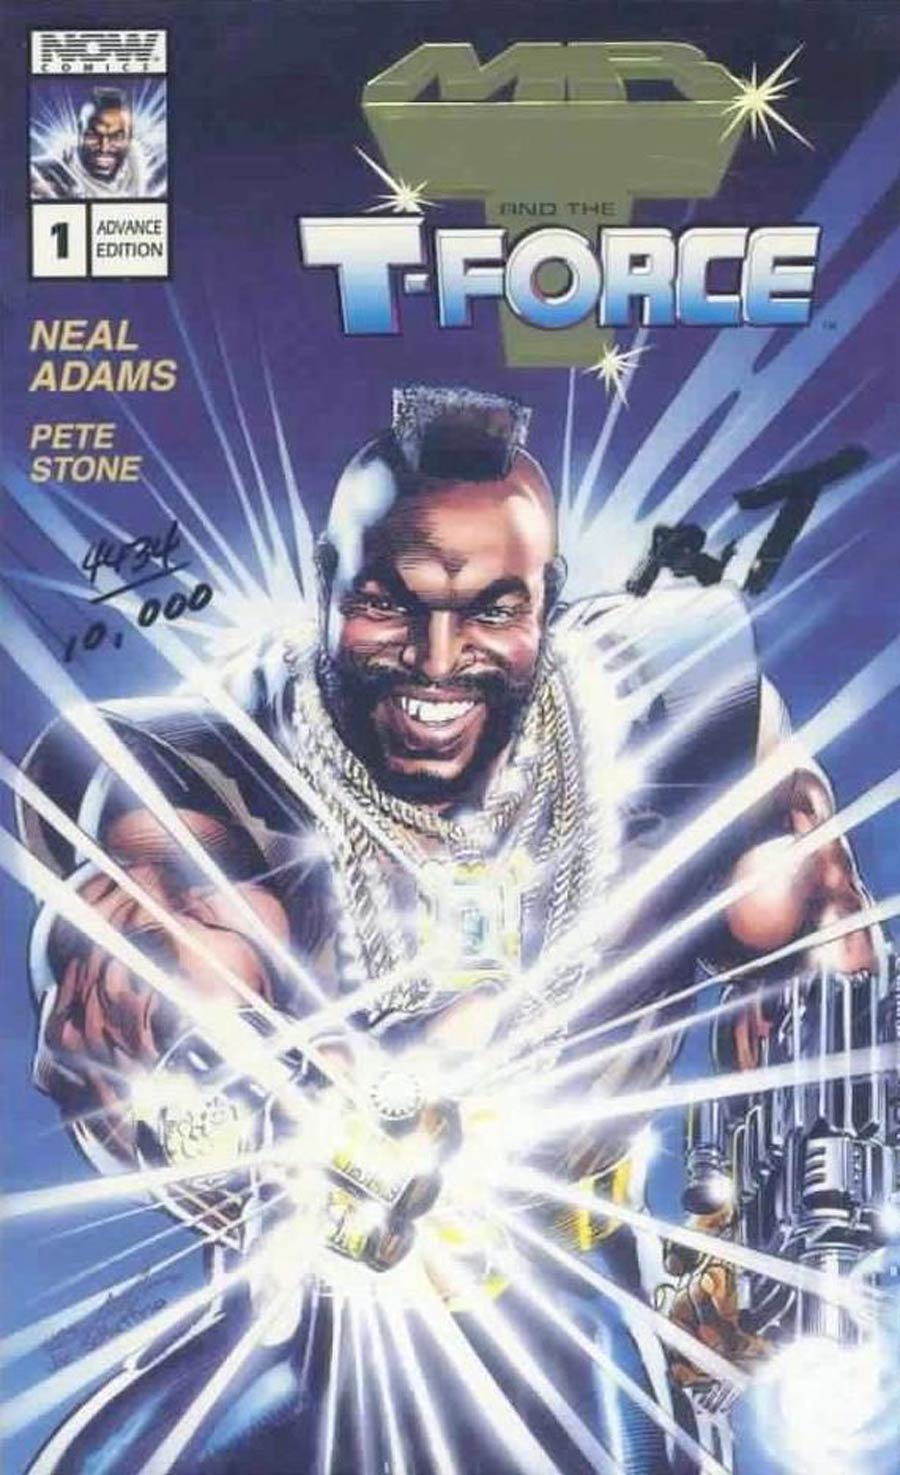 Mr T And The T-Force #1 Cover F Advanced Gold Edition